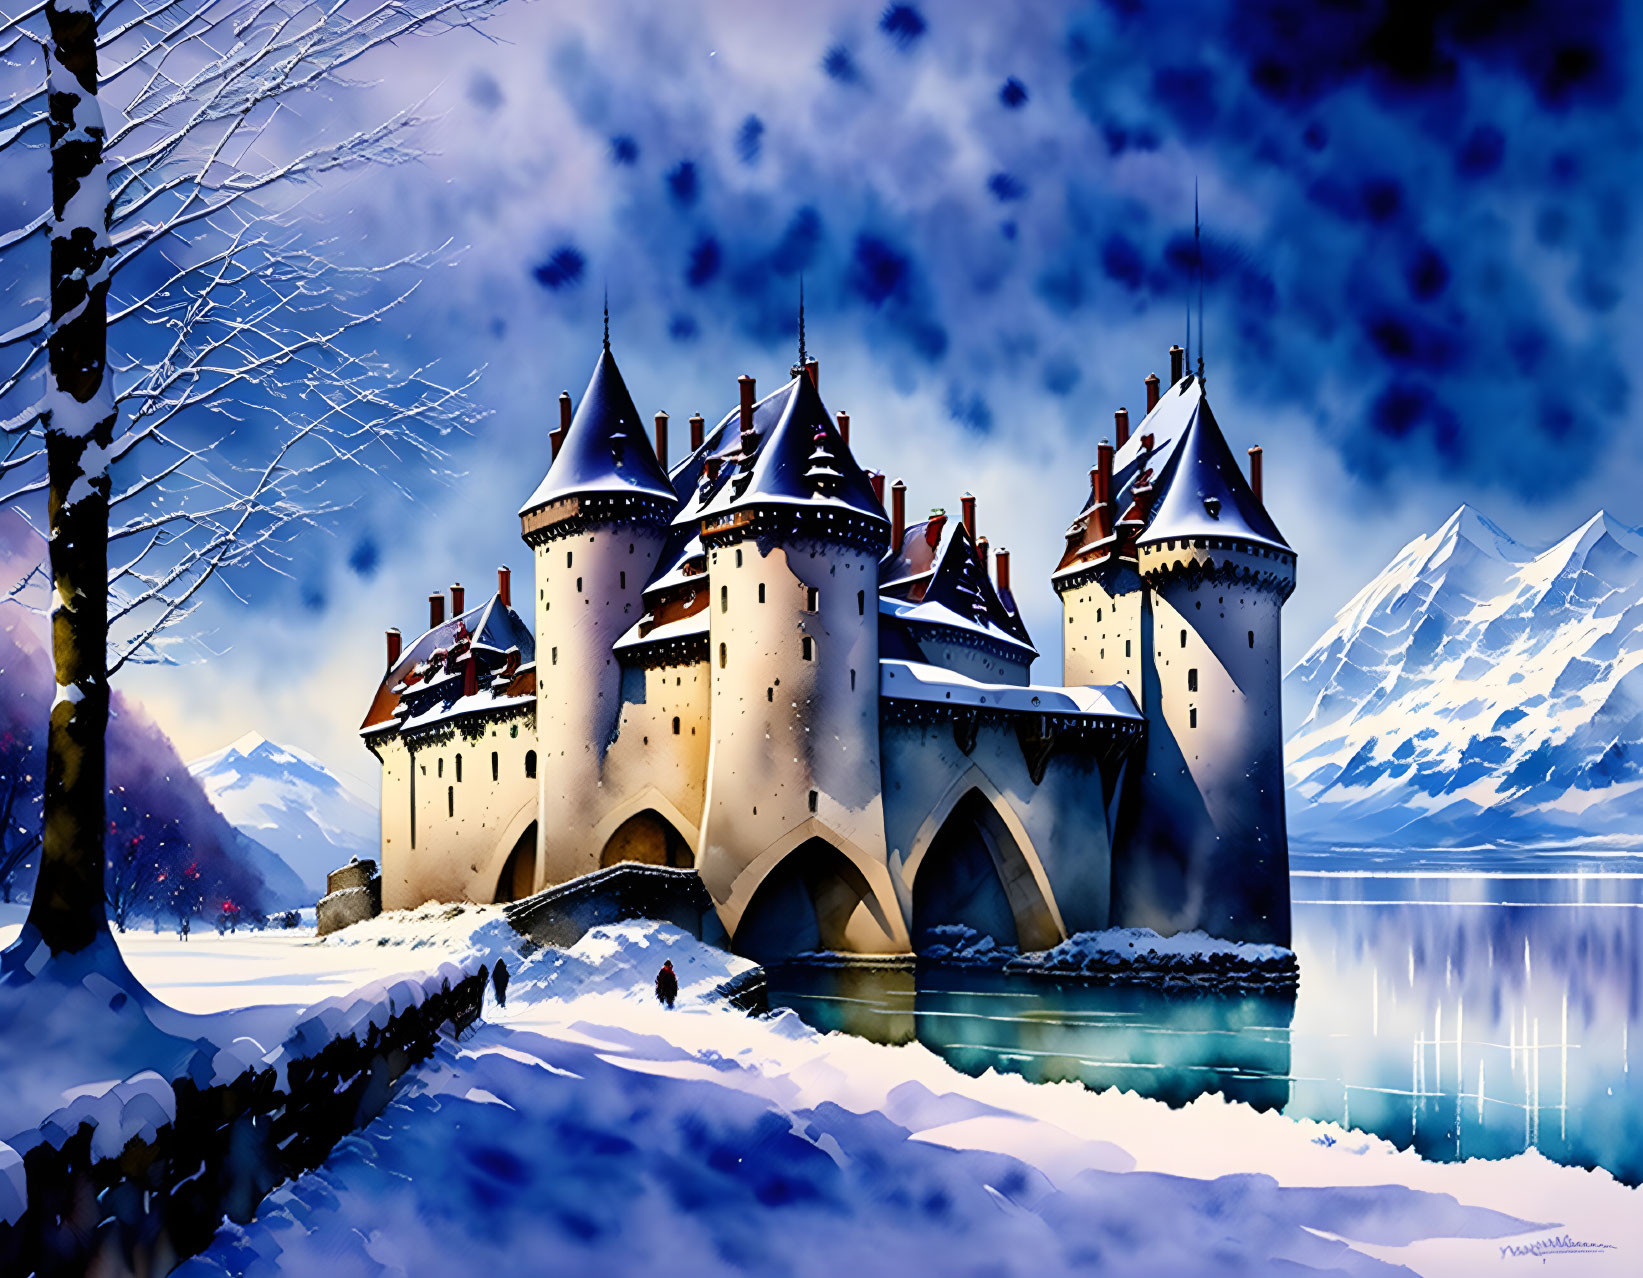 Majestic castle in serene winter landscape with snowy mountains and icy blue lake